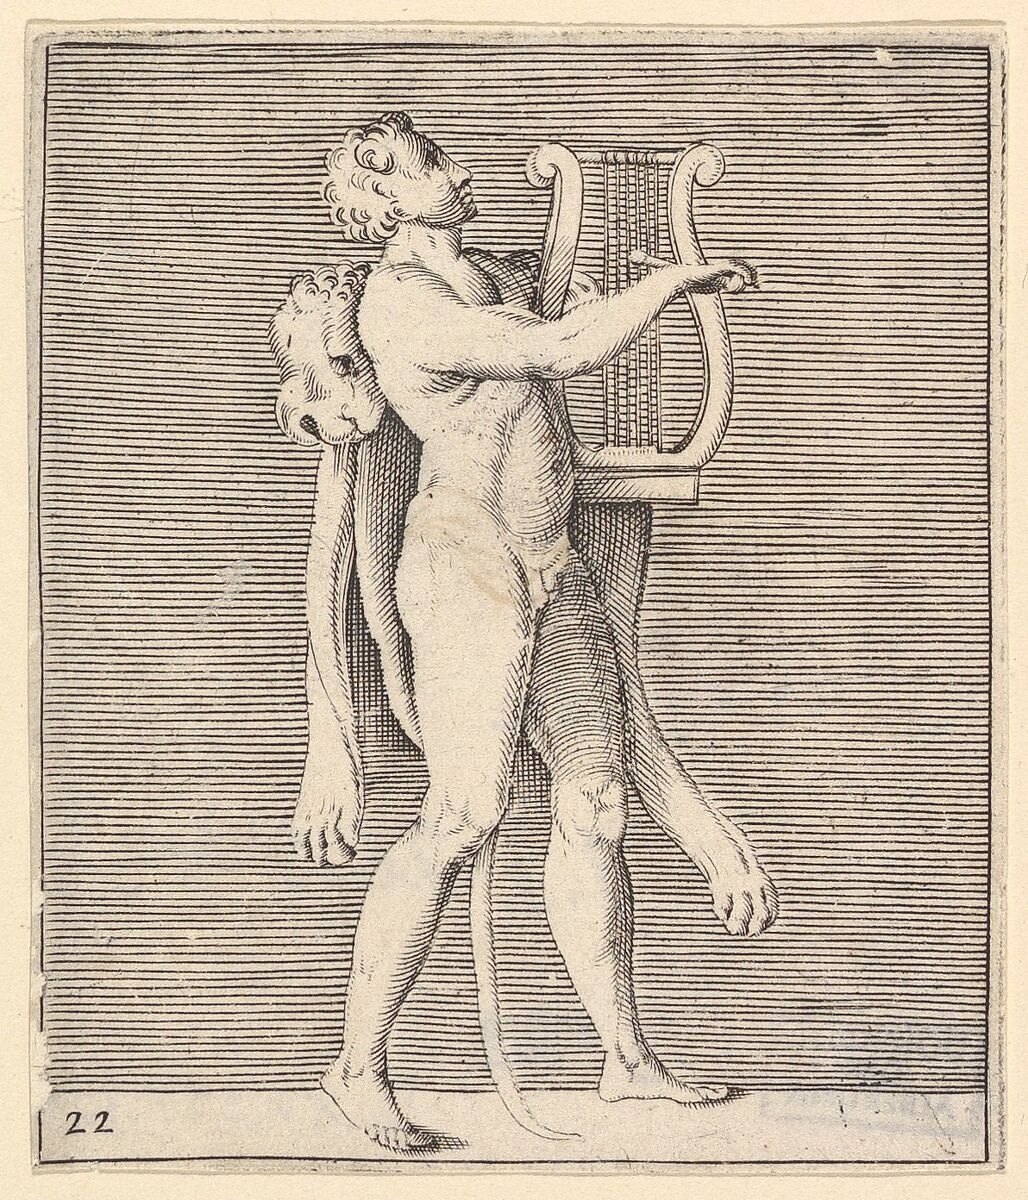 Hercules playing a lyre, a lionskin draped over his shoulder, from "Ex Antiquis Cameorum et Gemmae Delineata/ Liber Secundus/et ab Enea Vico Parmen Incis", Anonymous, Italian, 16th century, Engraving; third state 